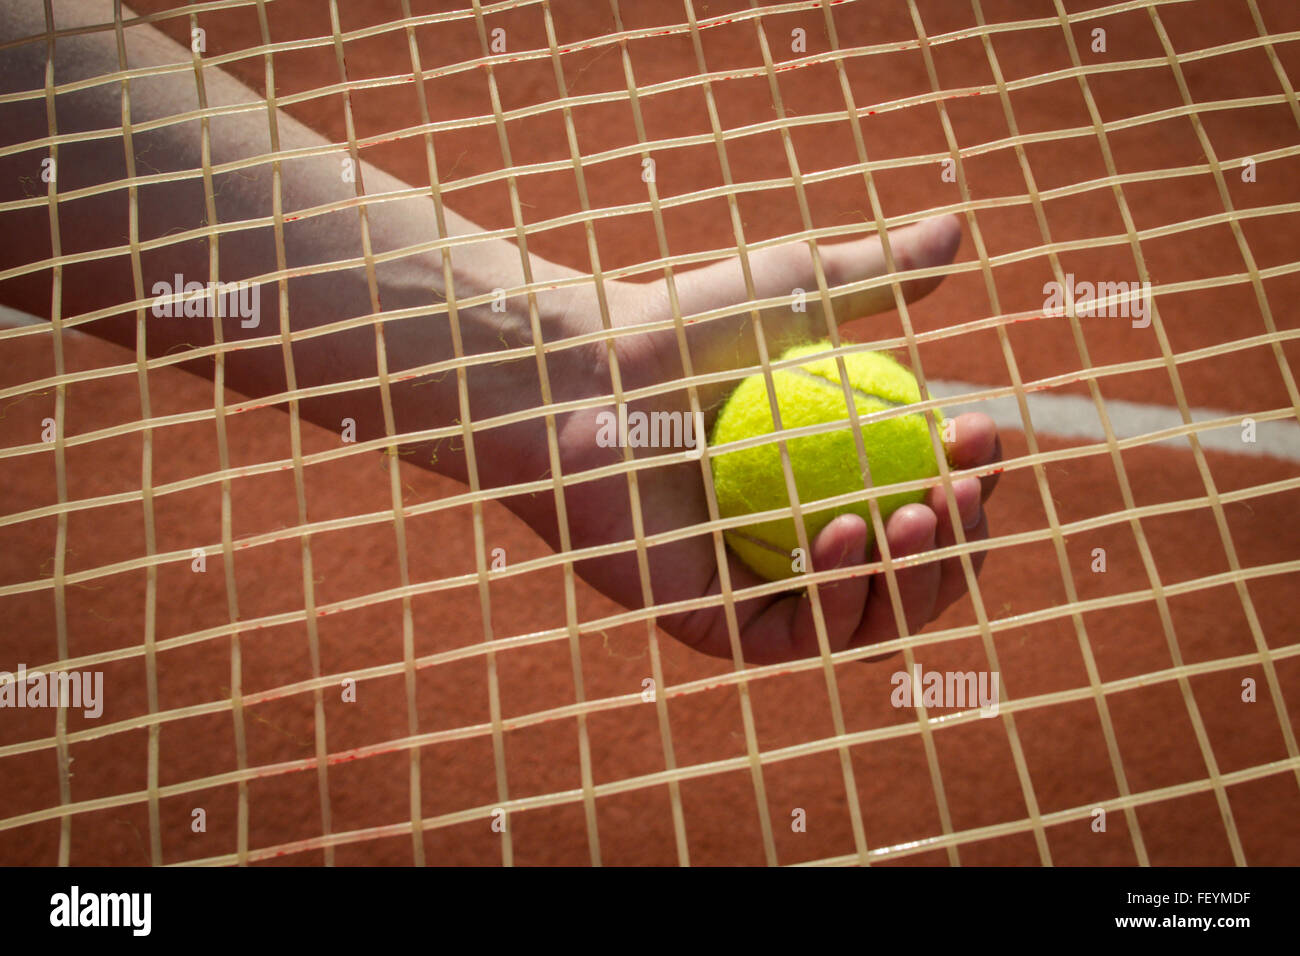 Landscape image of a player's hand holding a tennis ball seen through a racket's string Stock Photo